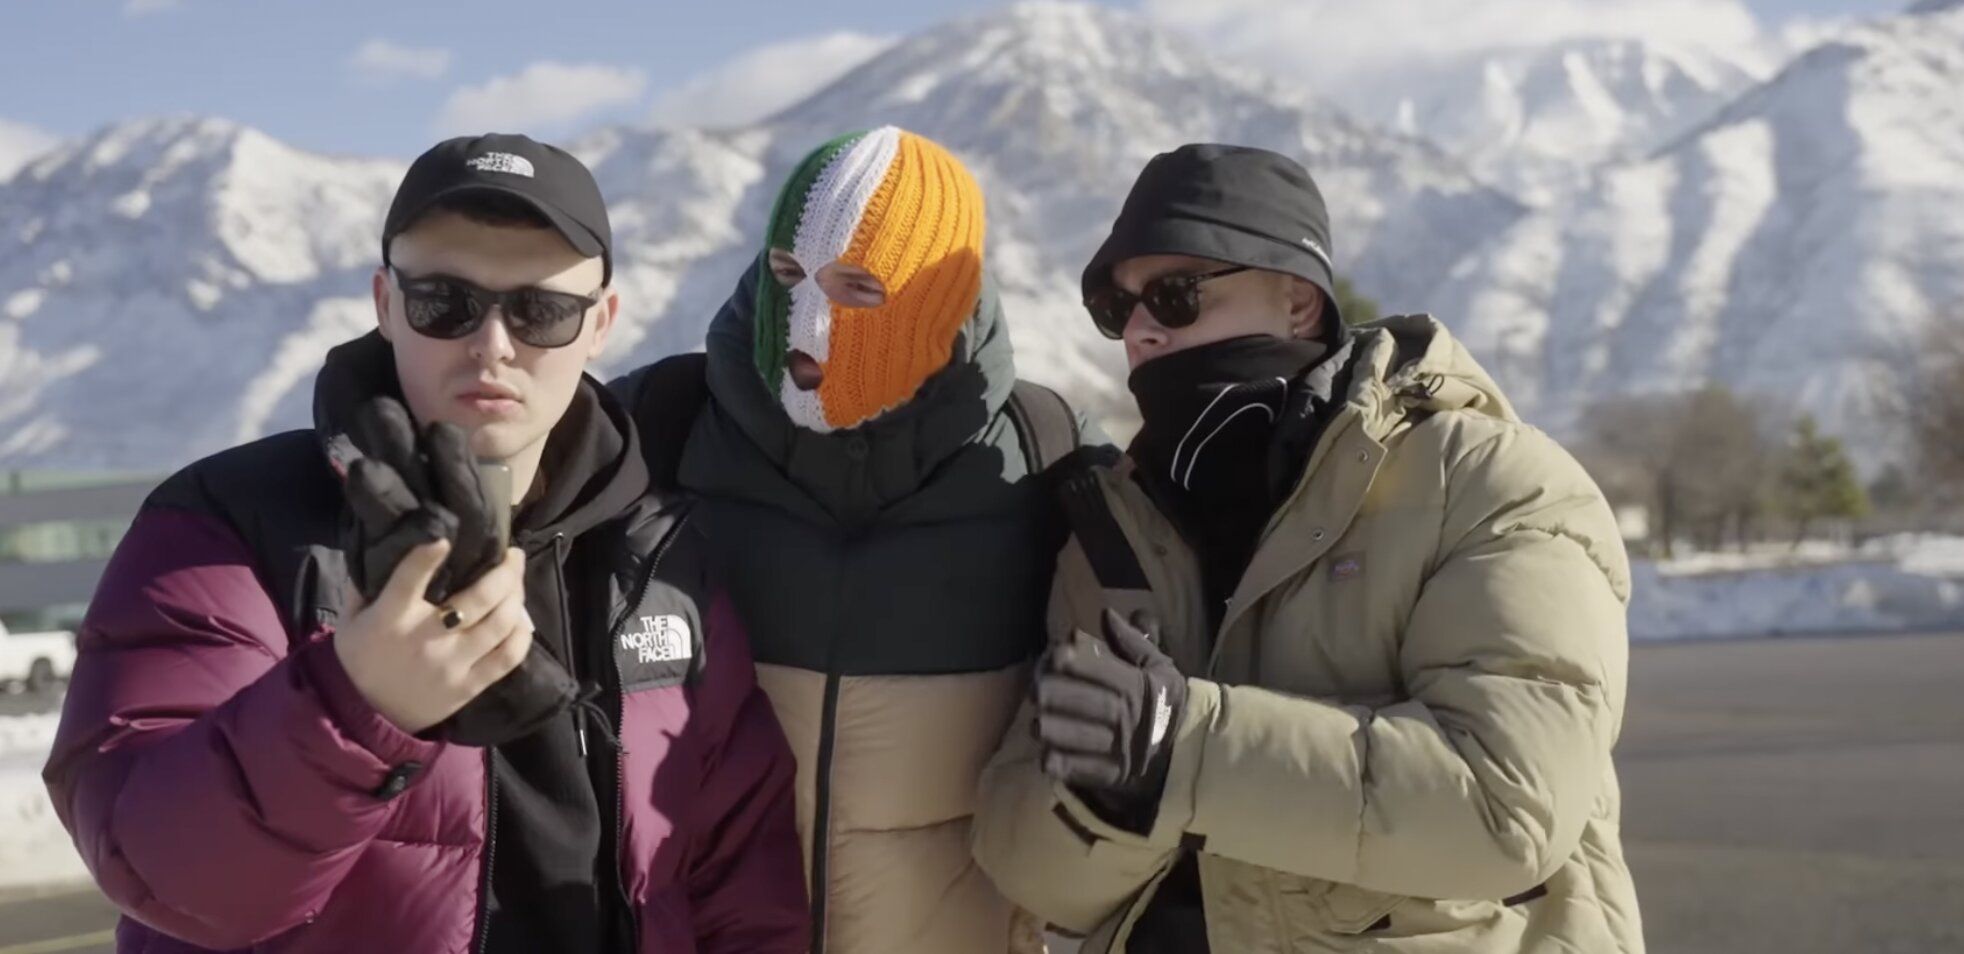 THE HIGH LIFE: Kneecap have been living it up in Utah this week at the Sundance Film Festival